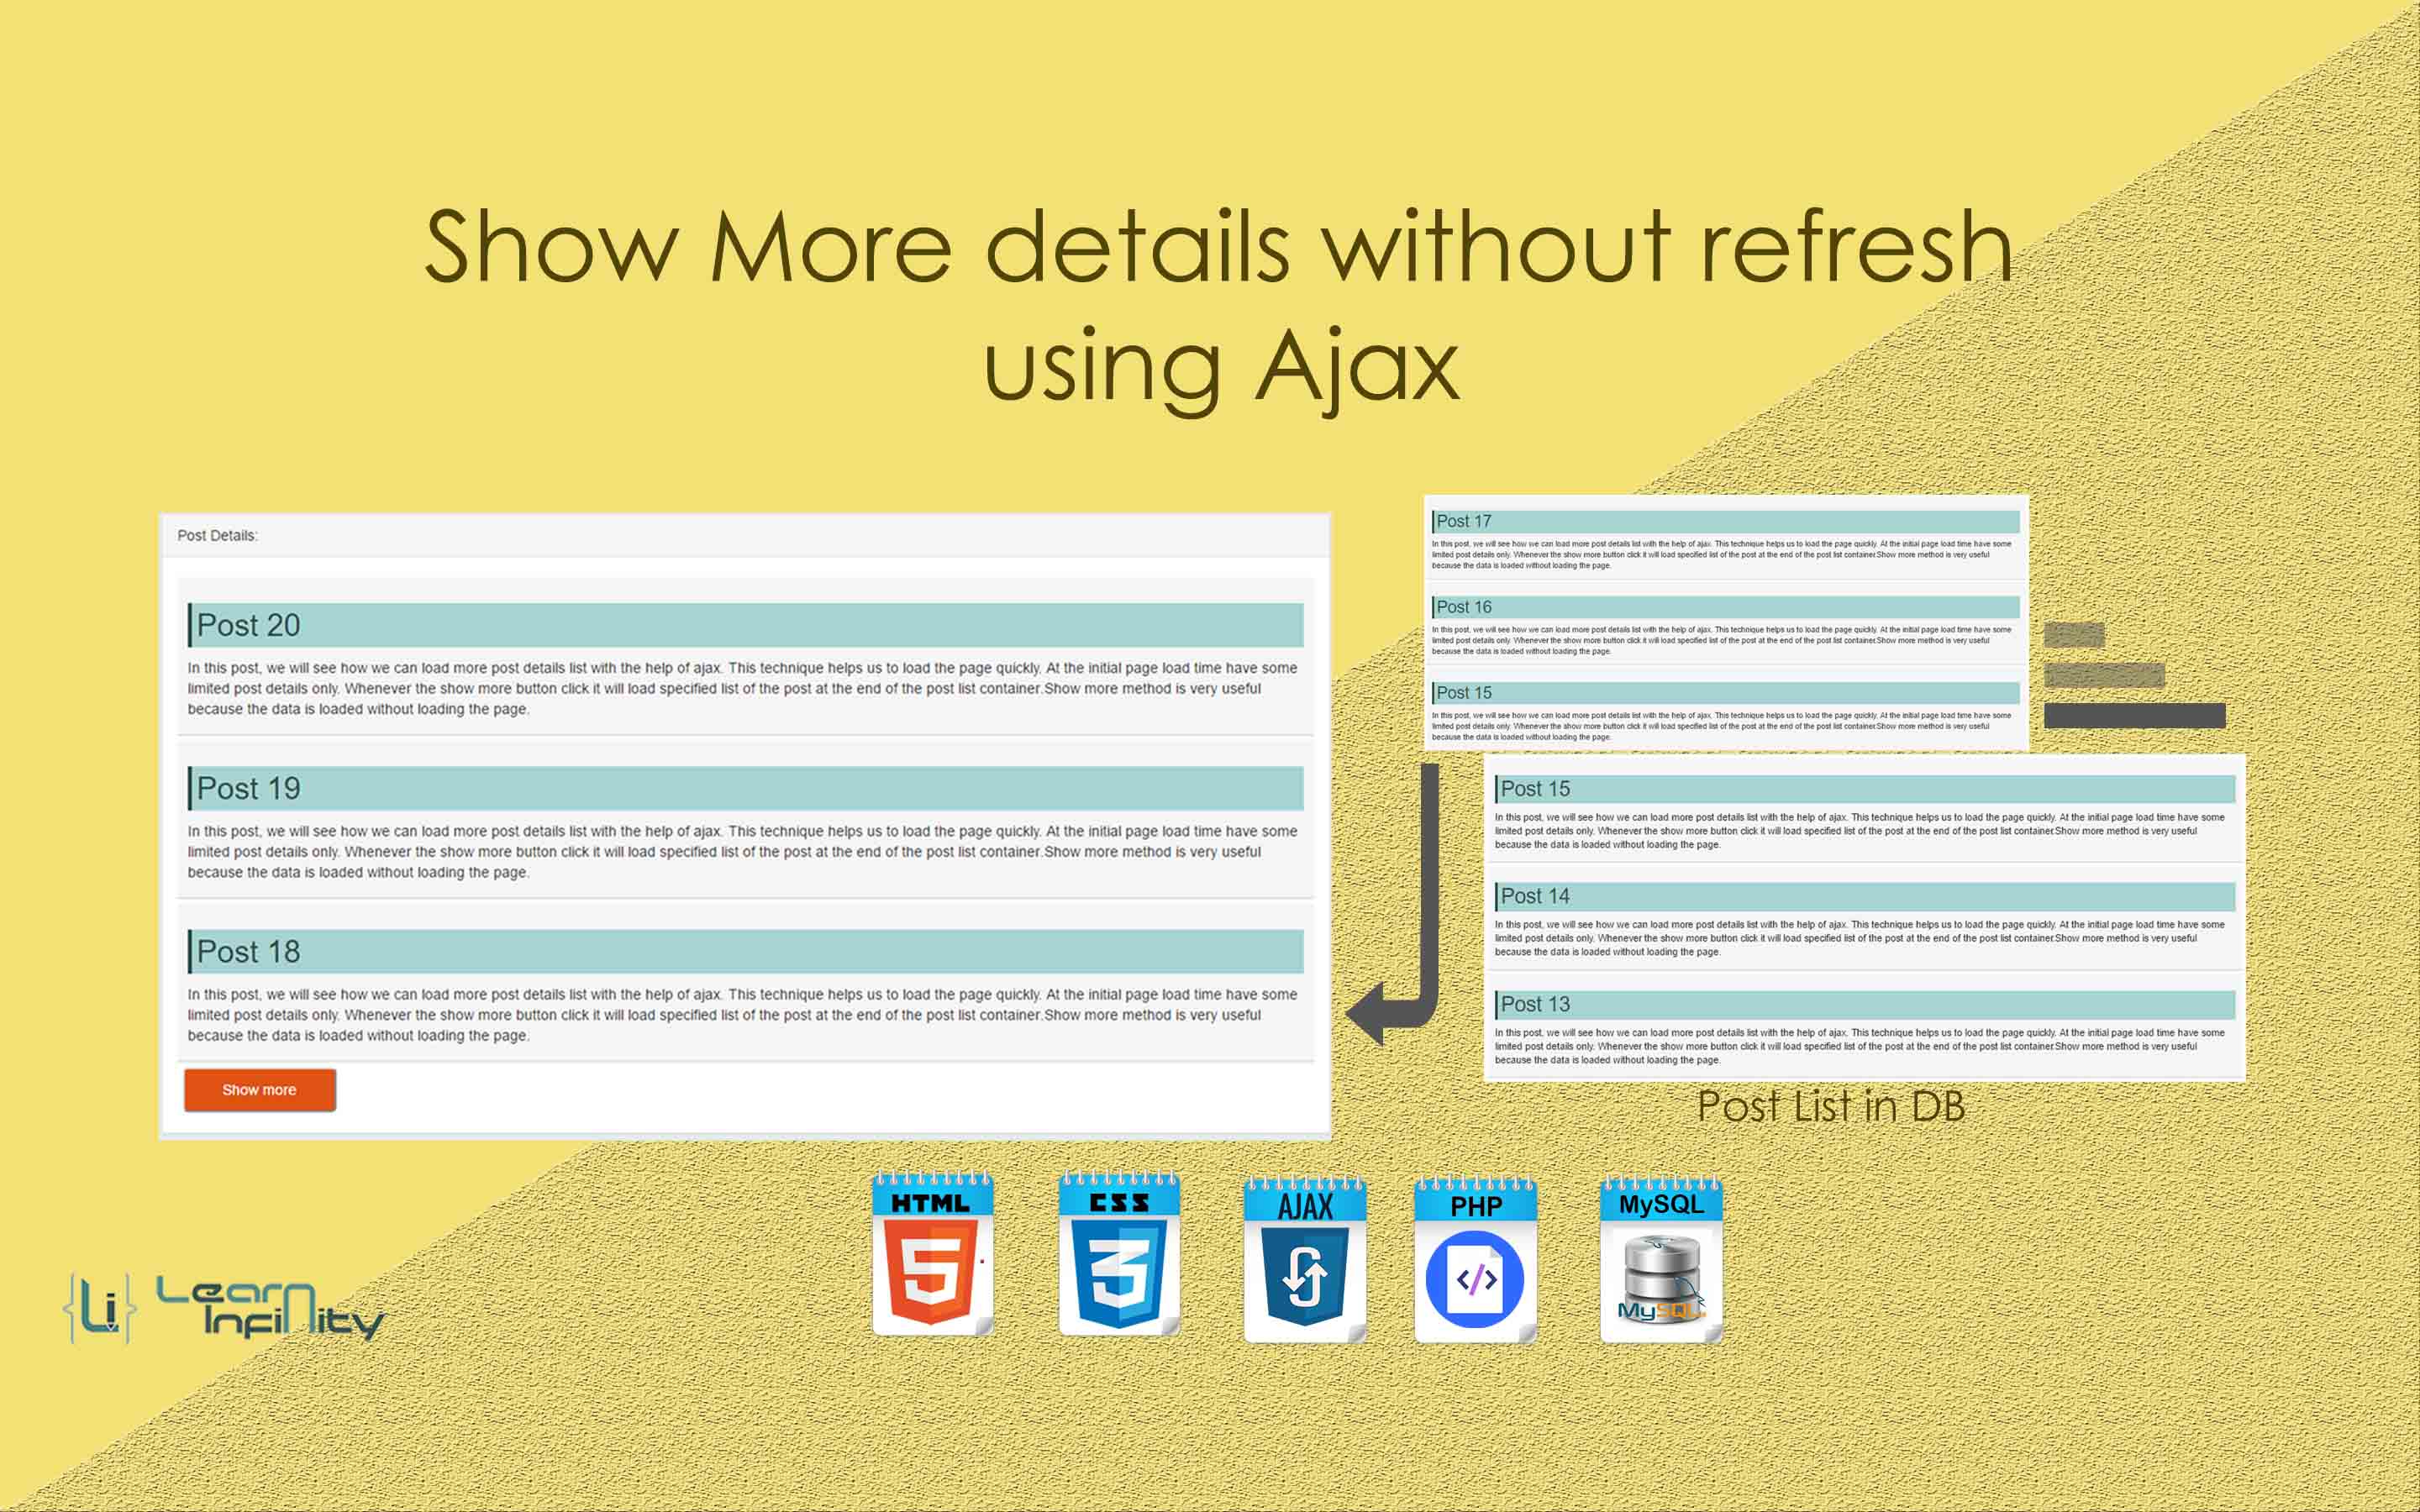 Show More details without refresh using Ajax